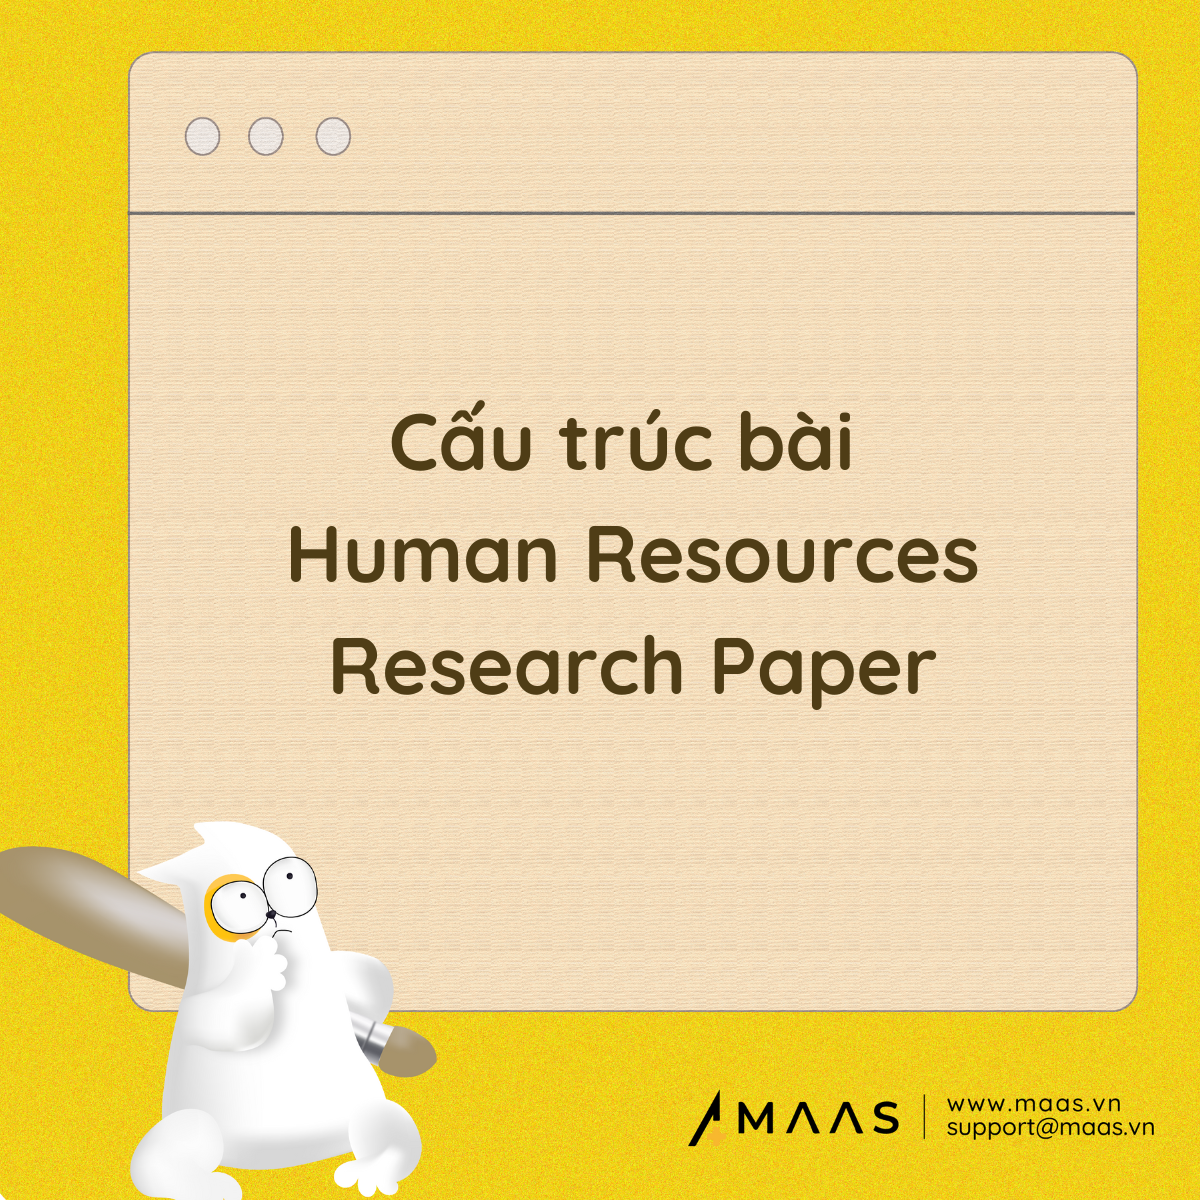 Human Resources Research Paper